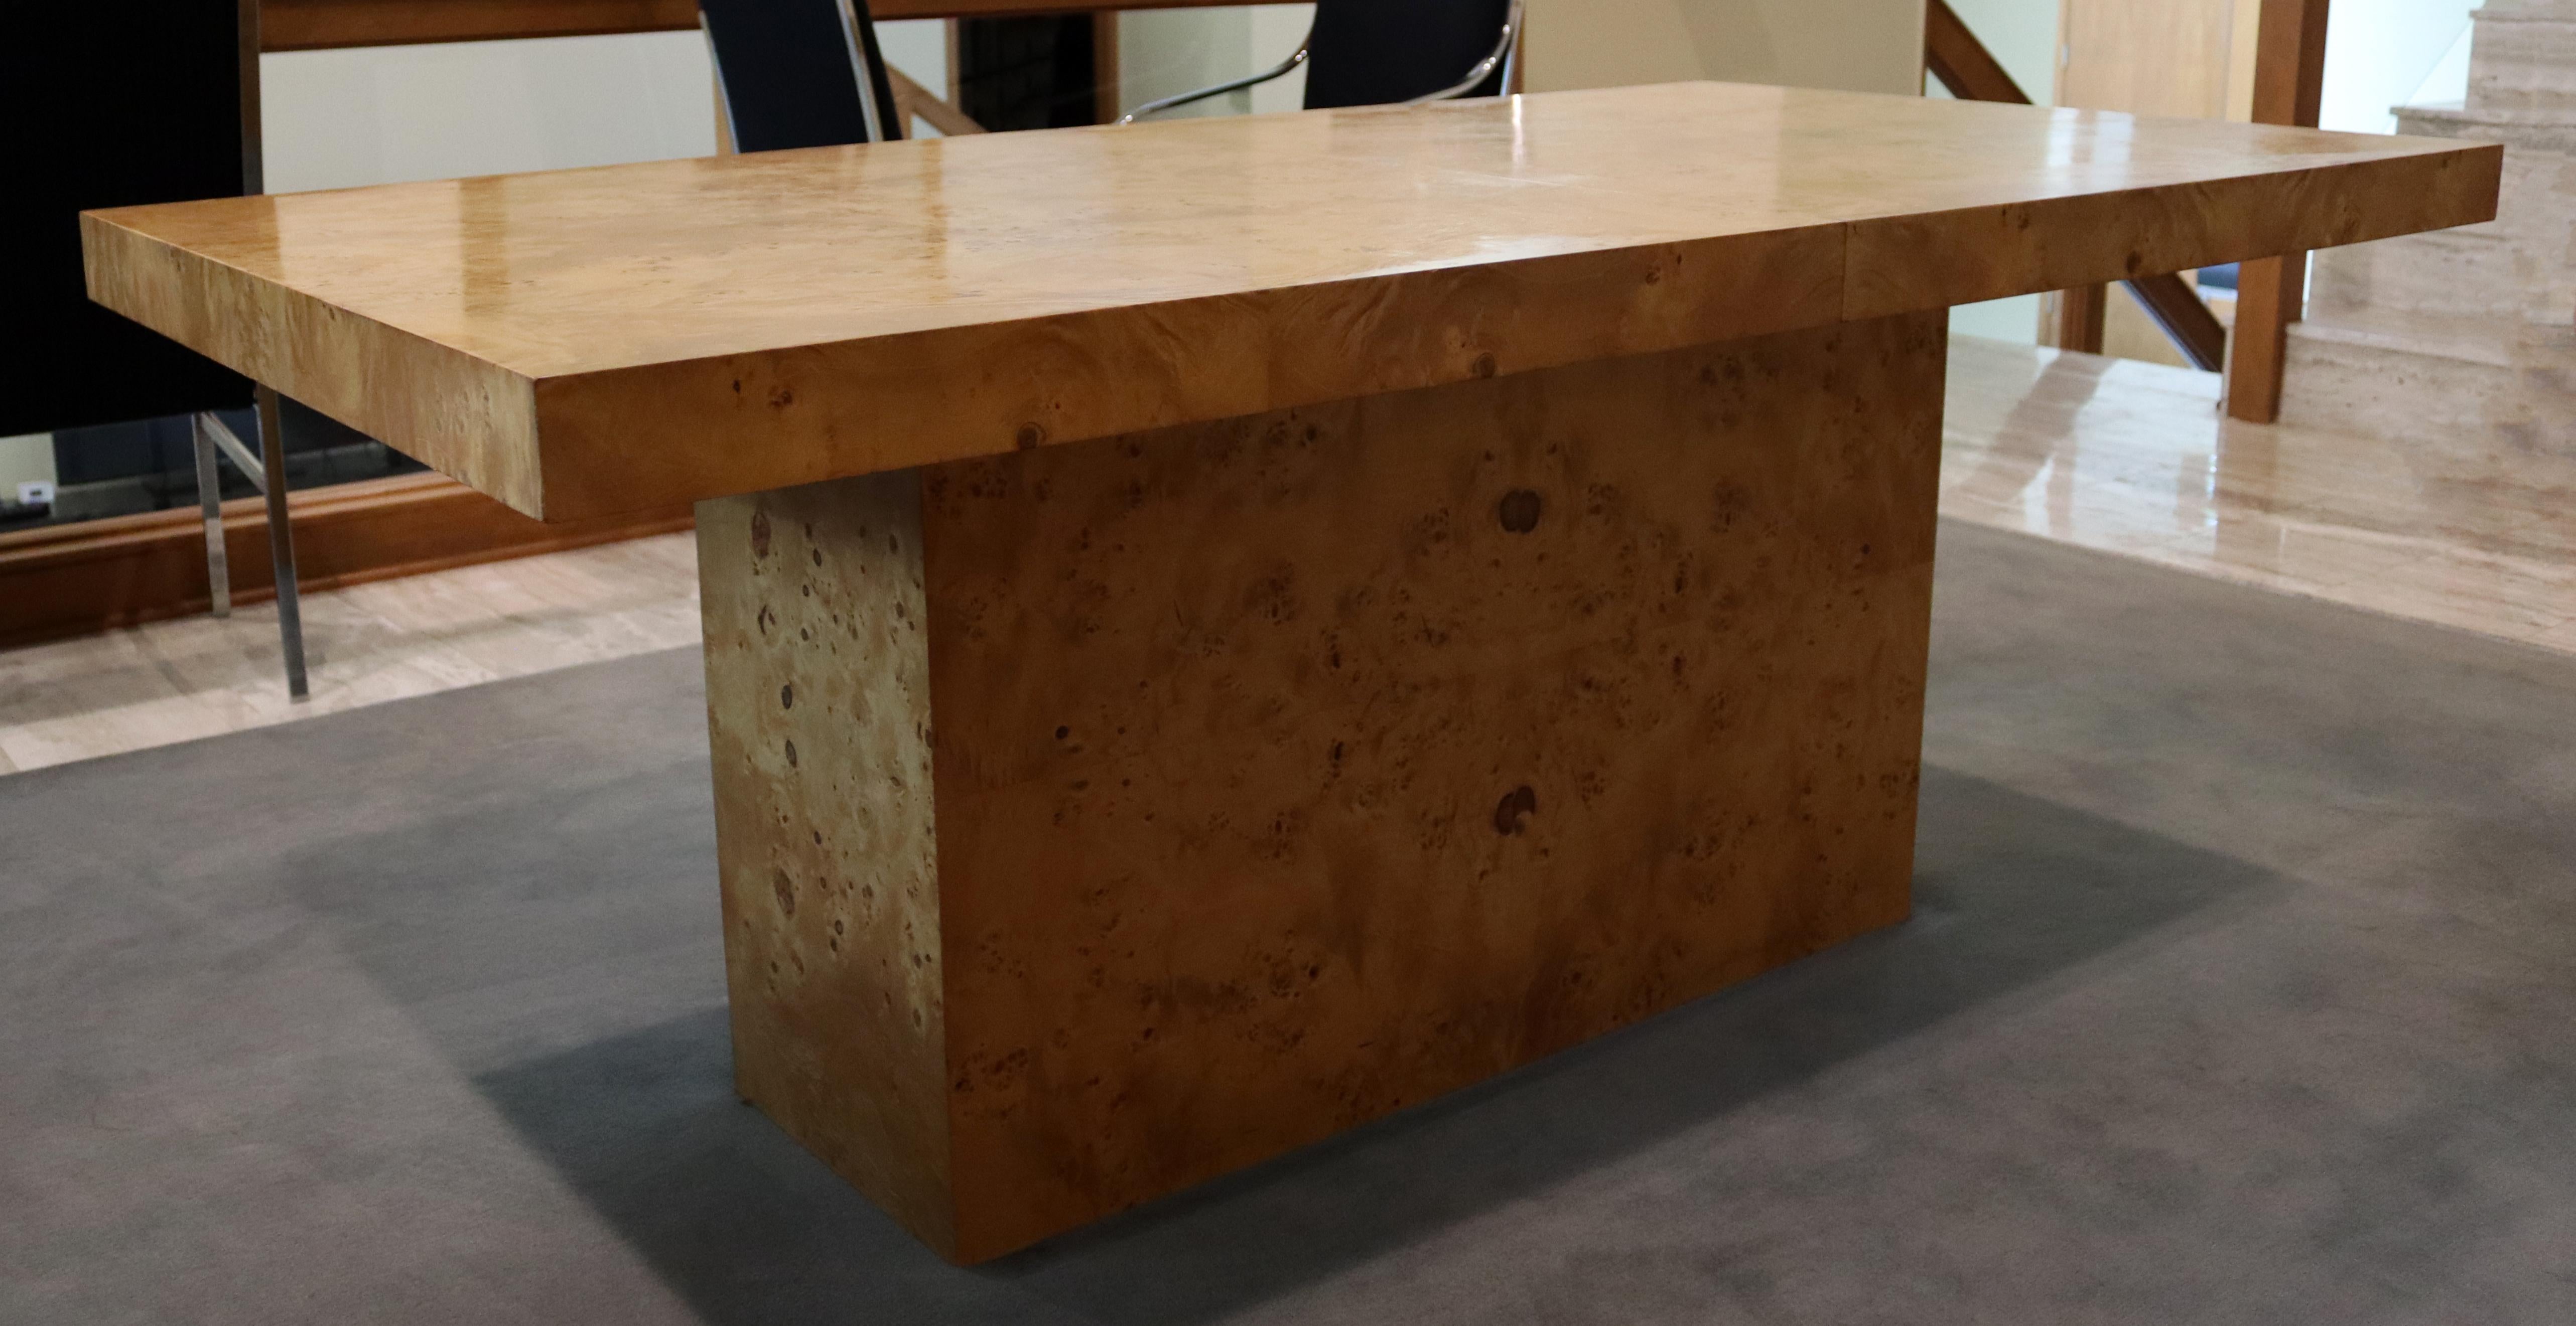 Late 20th Century Mid-Century Modern Milo Baughman Burl Wood Expandable Dining Table 2 Leaves 80s